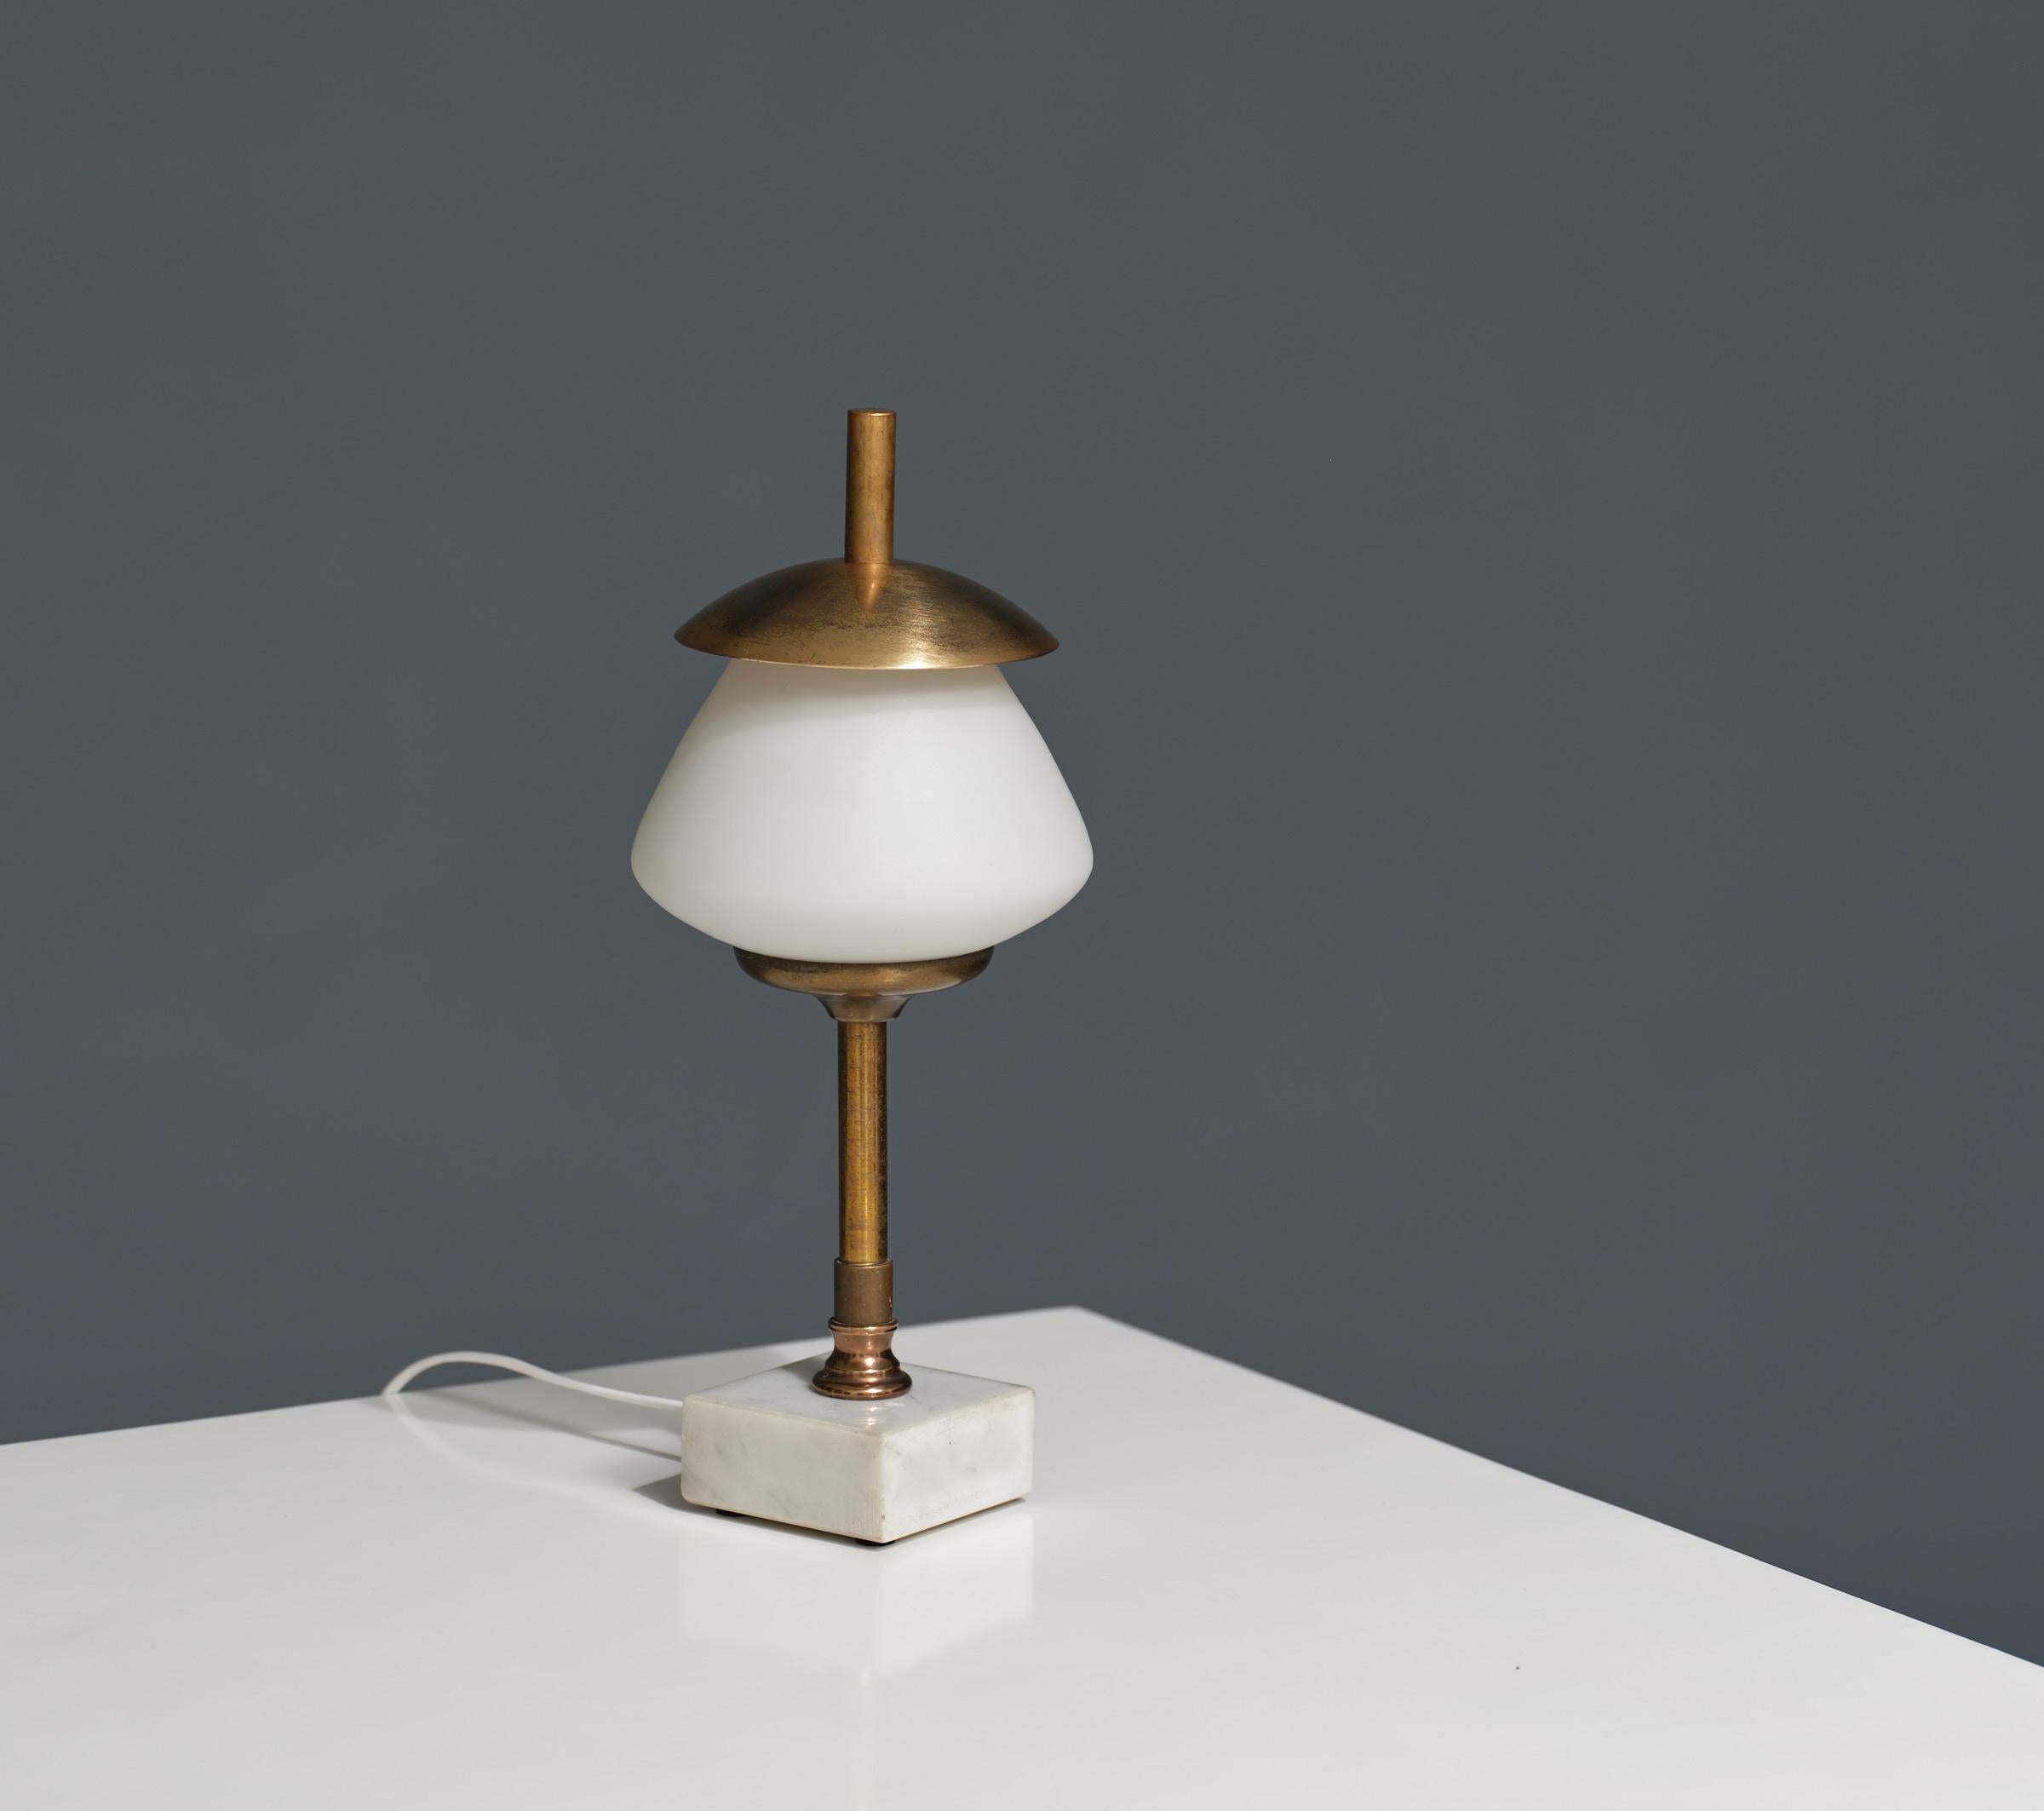 Elevate your decor with this exquisite Italian table lamp hailing from the iconic 1950s era. Meticulously restored and restyled by RETRO4M, this lamp embodies the essence of Italian design heritage. Its elegant features include a sturdy cubic marble